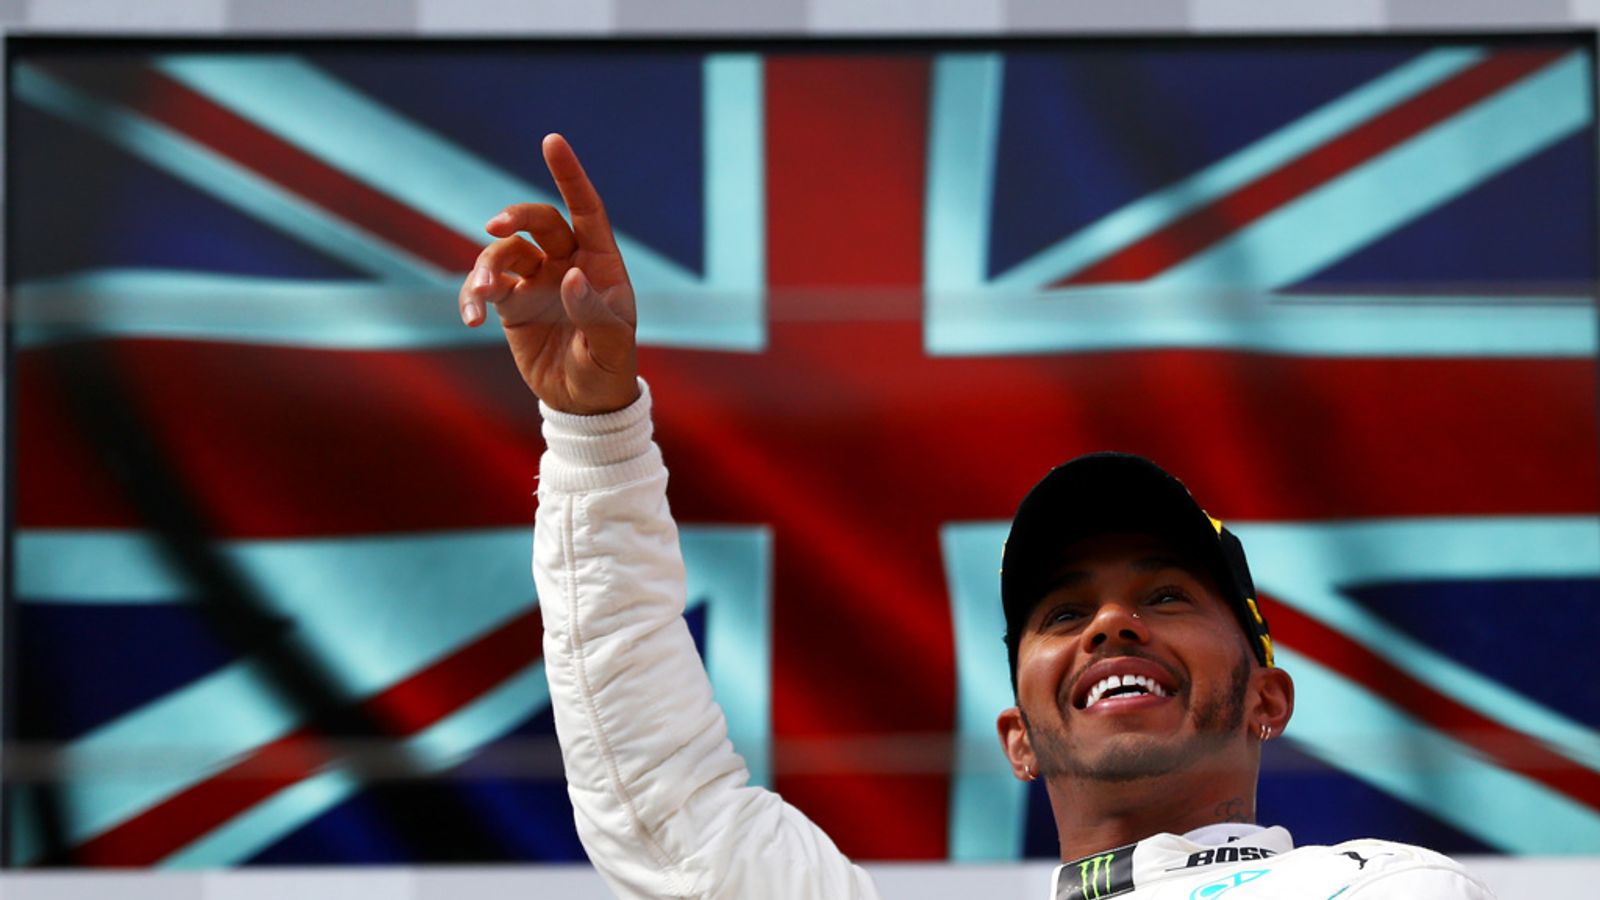 Lewis Hamilton revels in England's World Cup win and his victory in